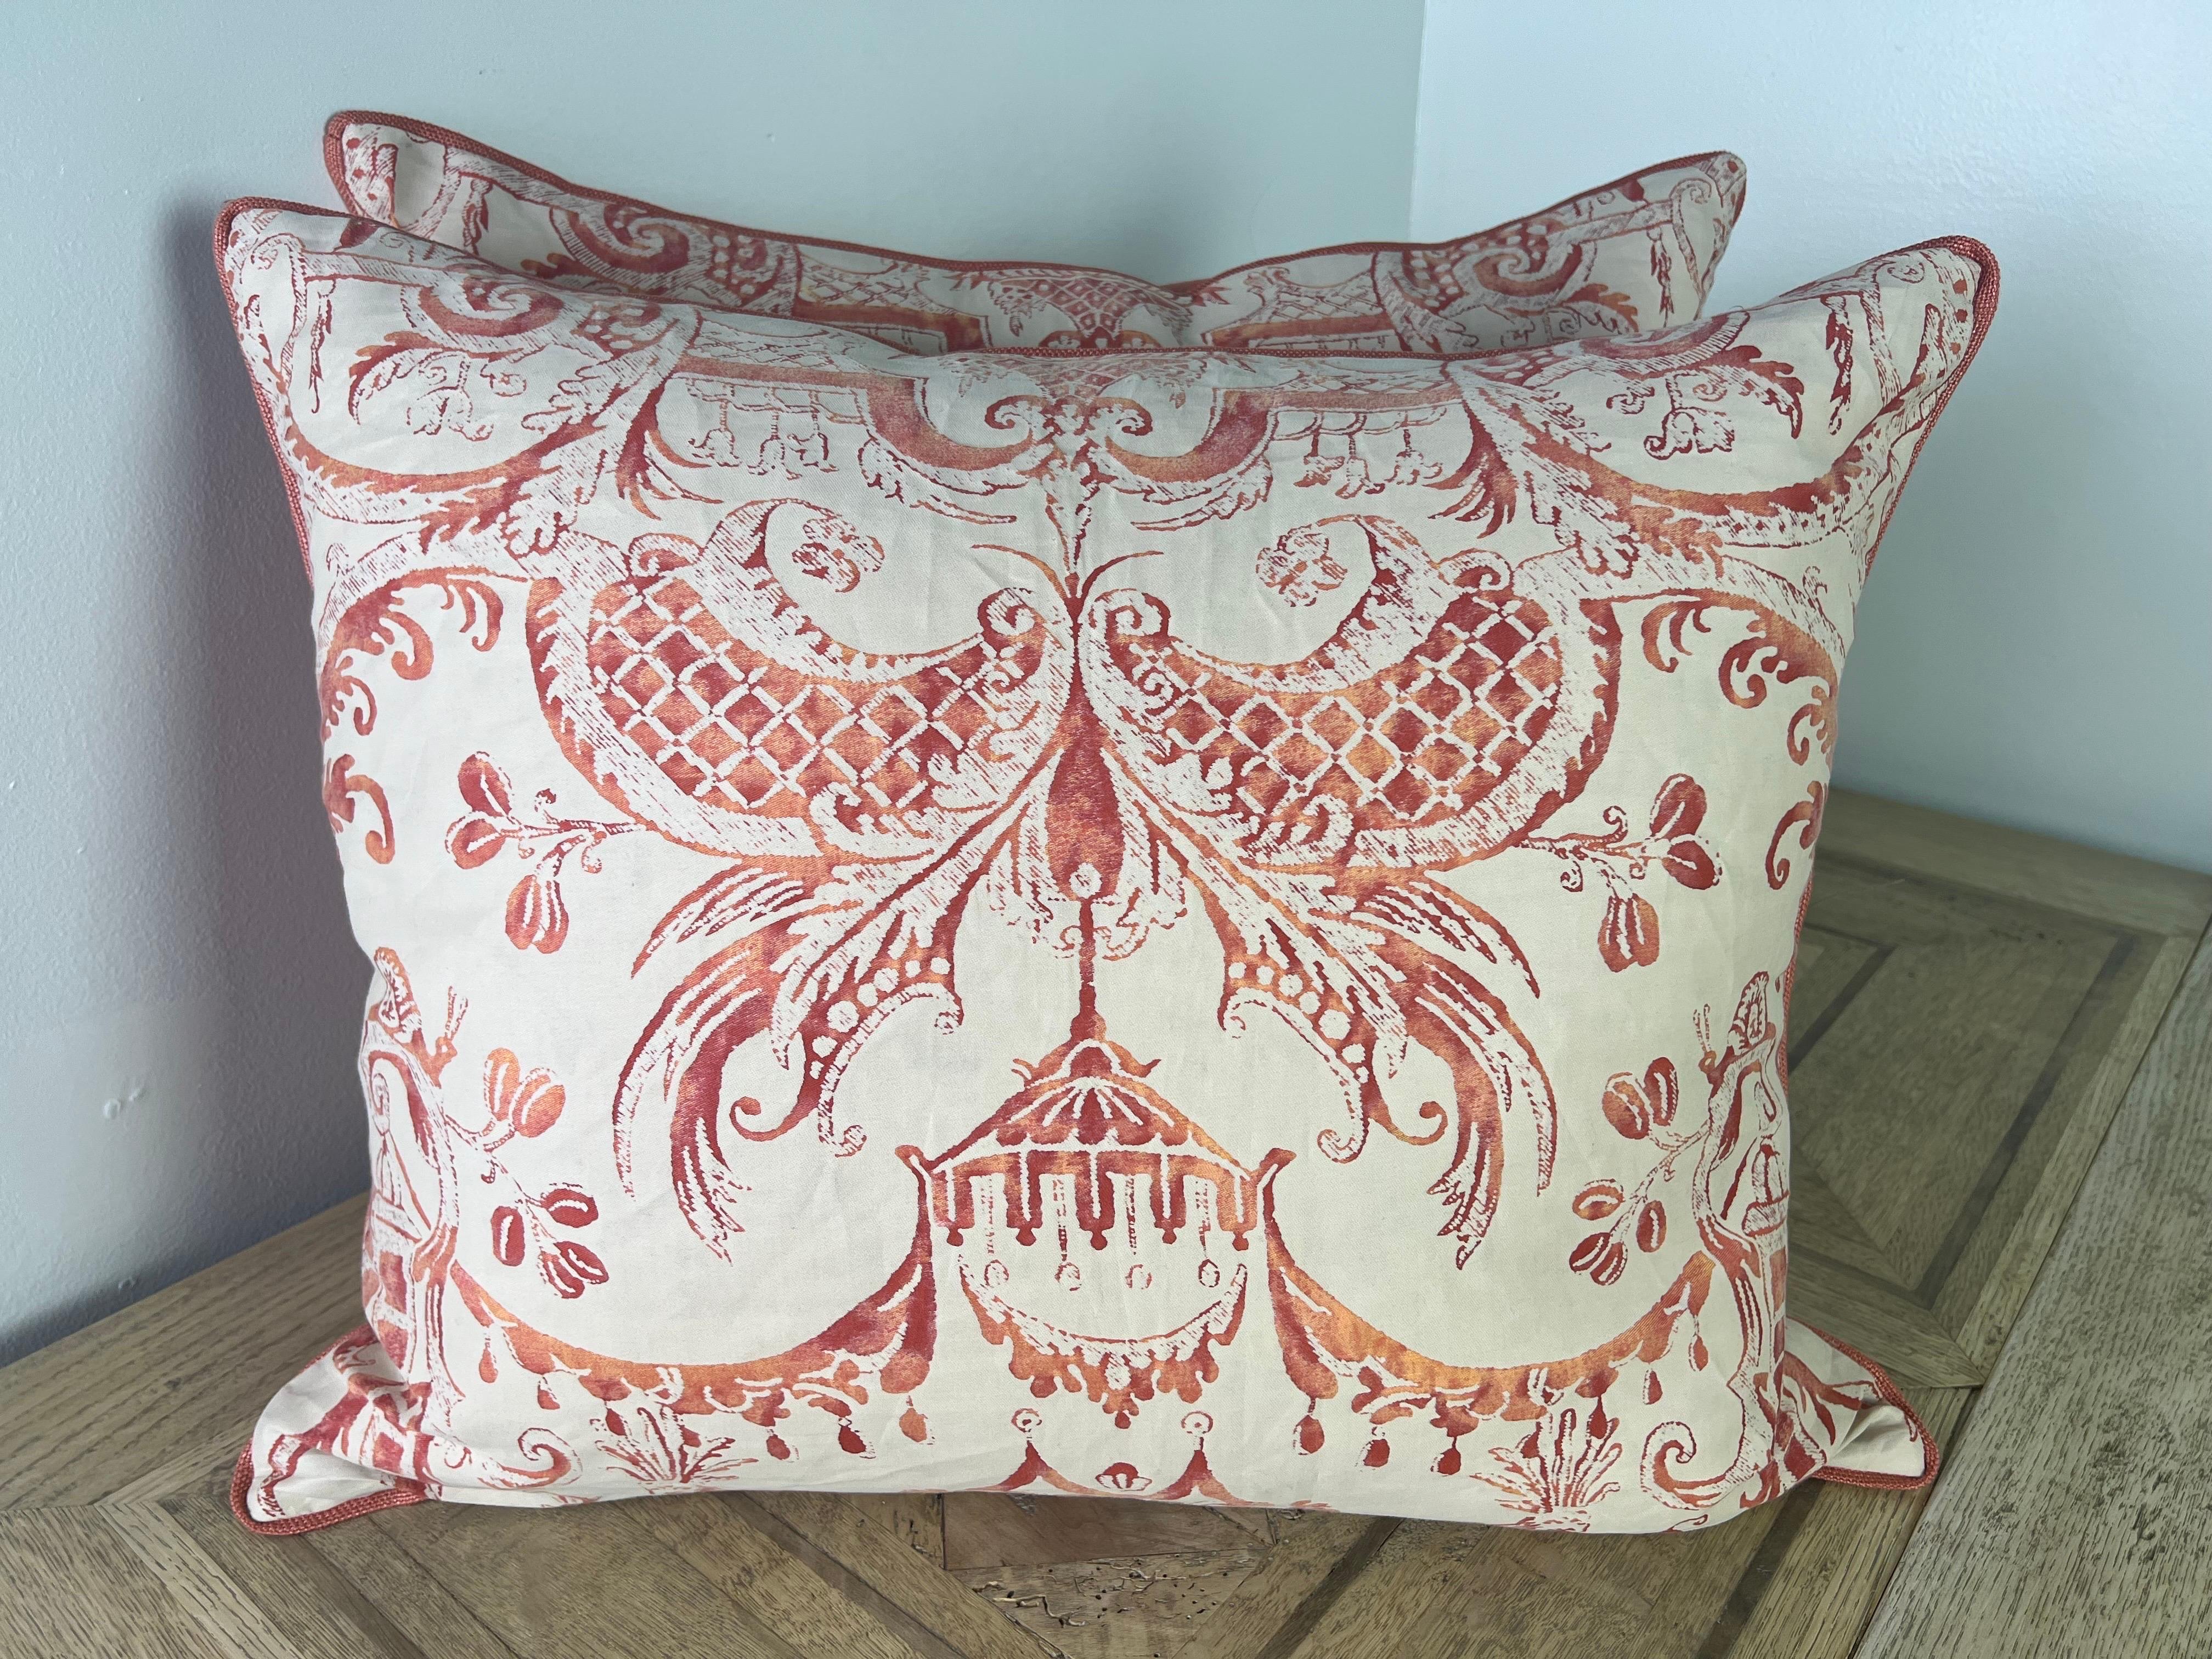 Pair of custom pillows with Fortuny's Mezzianno patterned Coral on ivory on the front and a solid coral linen on the backs. The pattern interpreted from designs of Jean Berain, depicting addorsed and confronting monkeys and lions set amidst